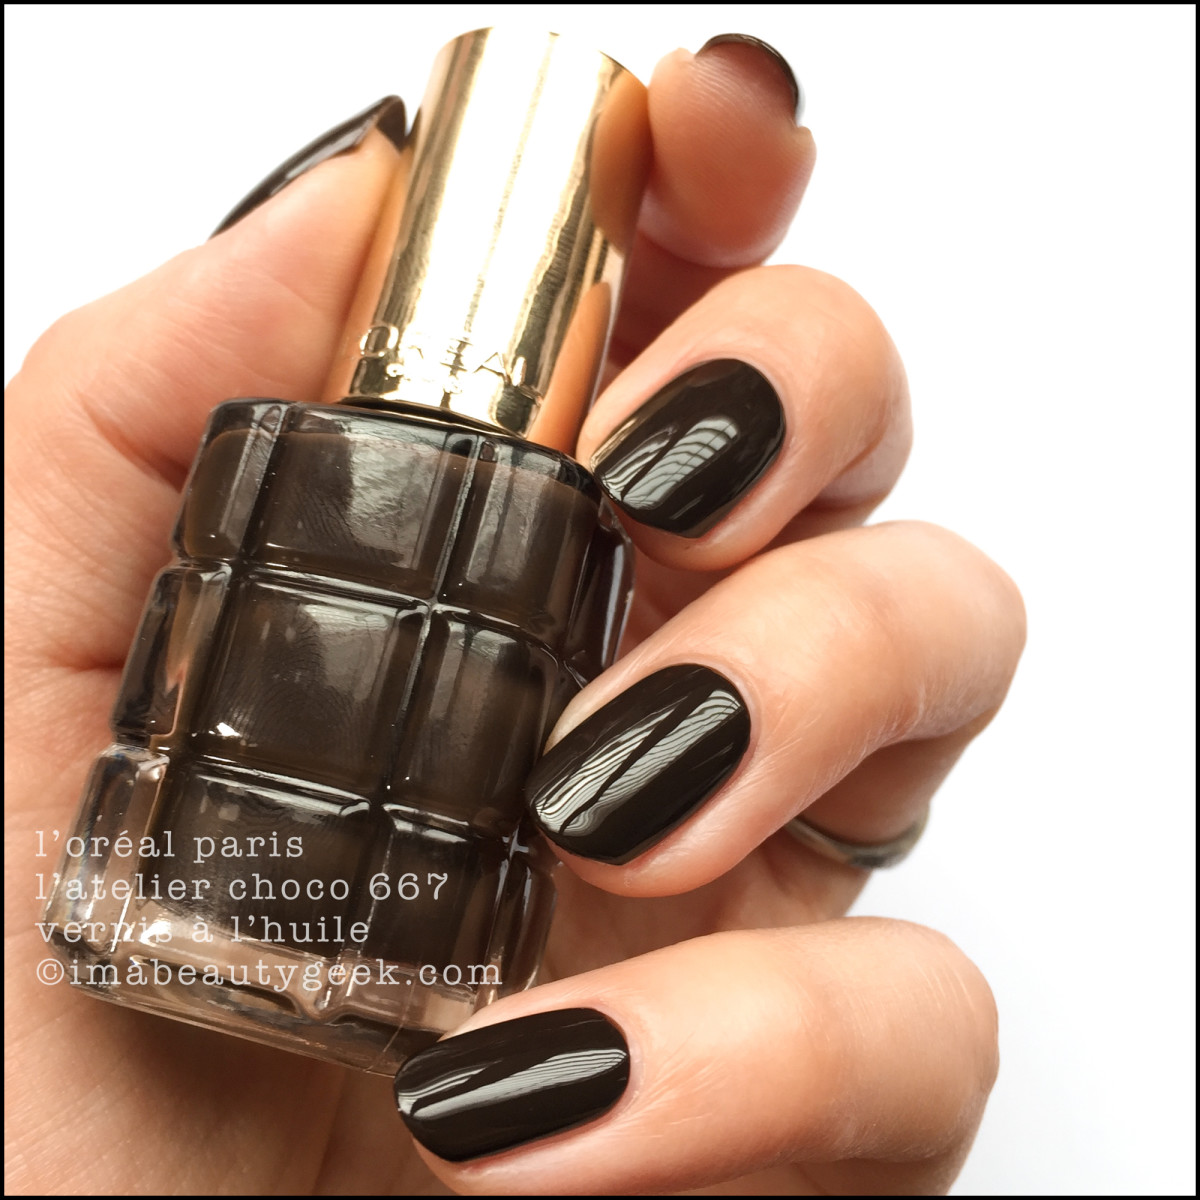 L'Oreal L'atelier Choco Vernis a l'Huile Swatches